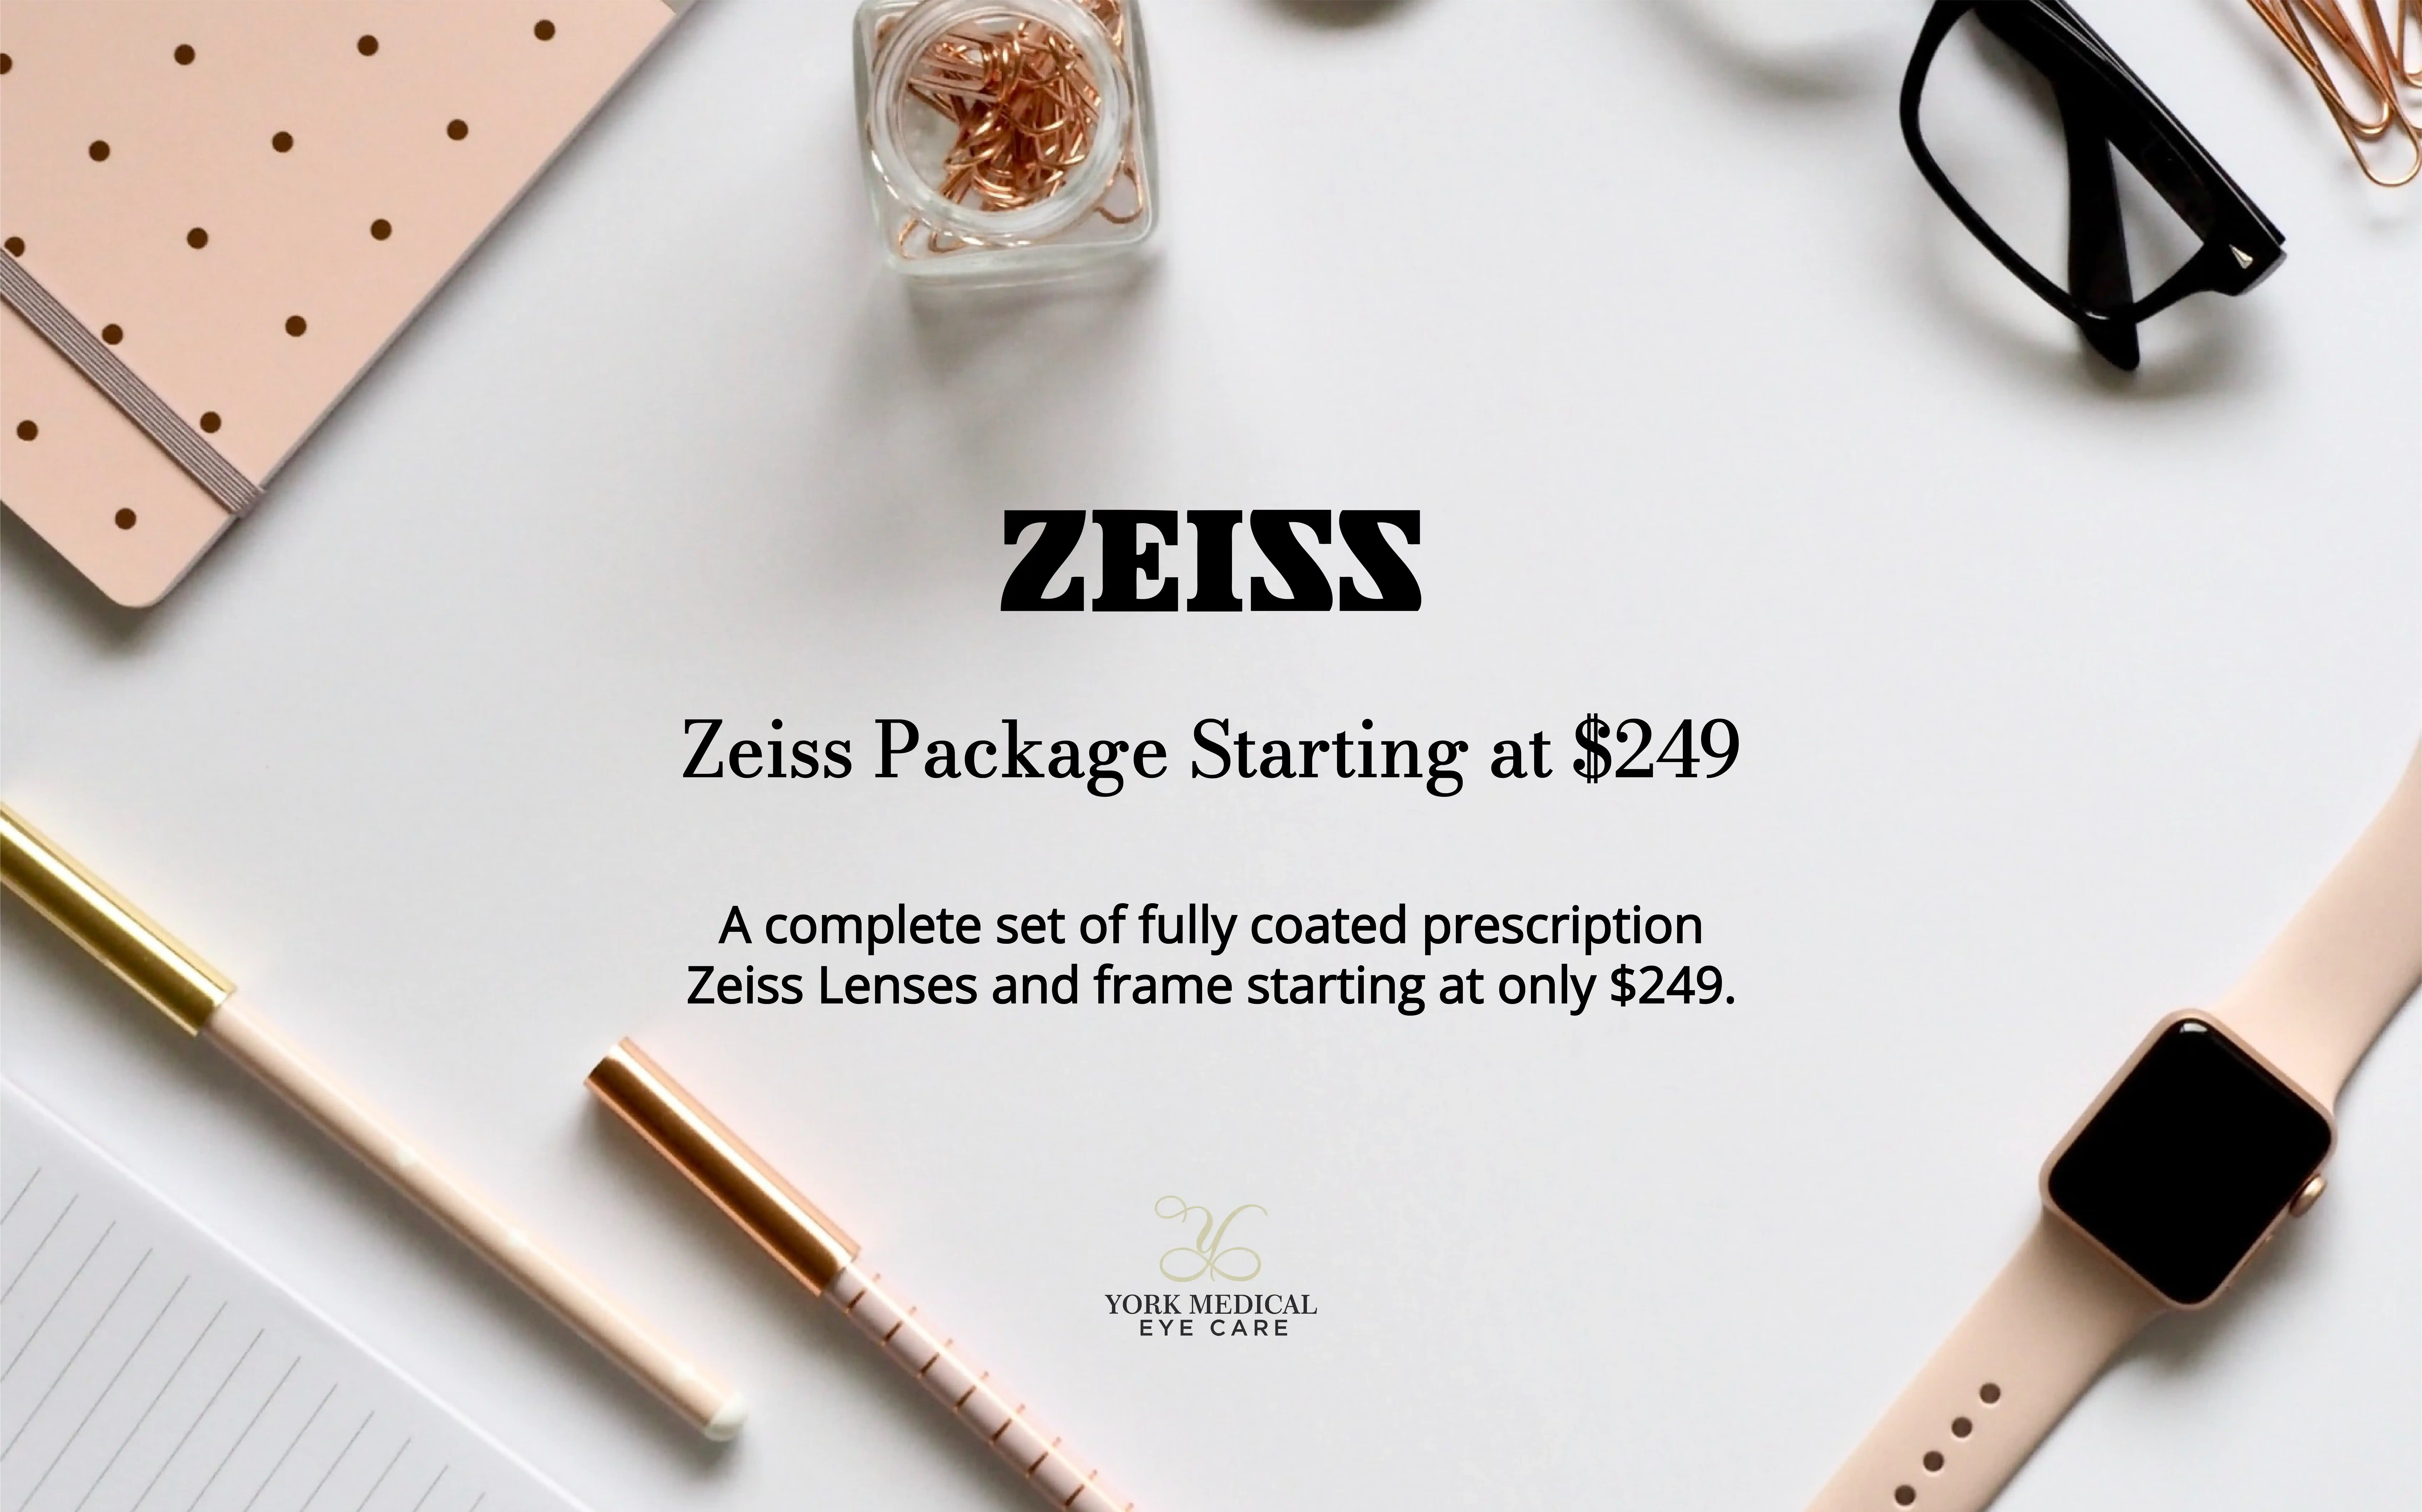 York Medical Eye Care and Zeiss Package Promotion